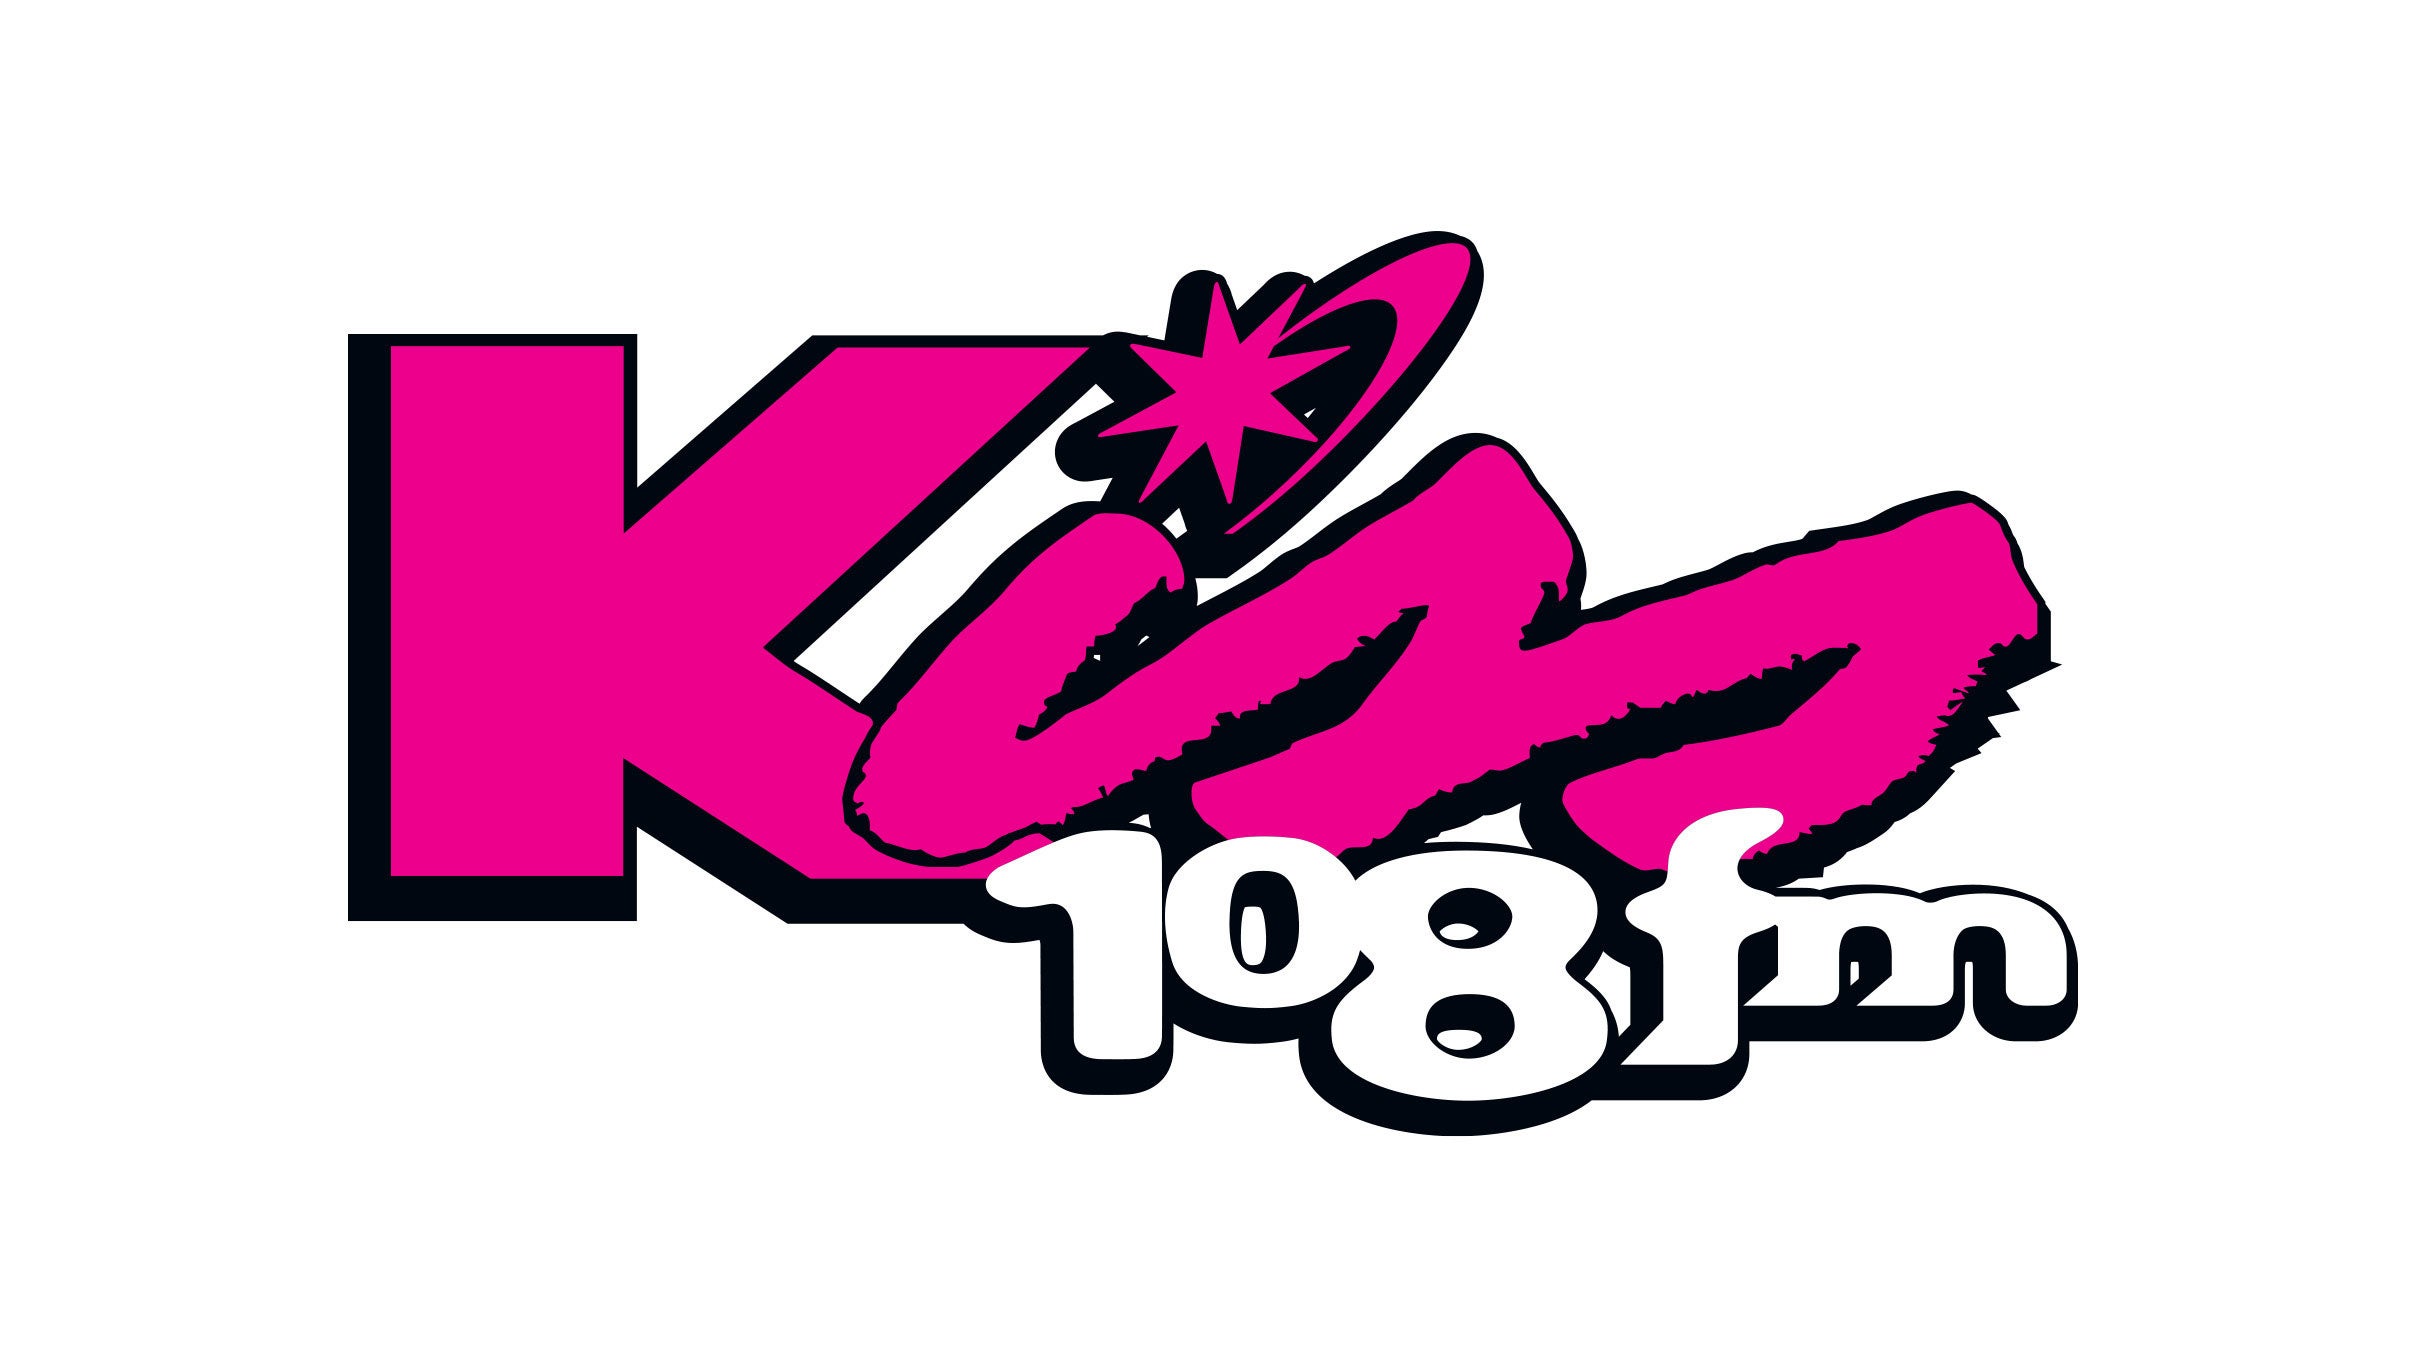 WiseGuys KISS 108 PRESENTS KISS CONCERT 2022 at Xfinity Center in